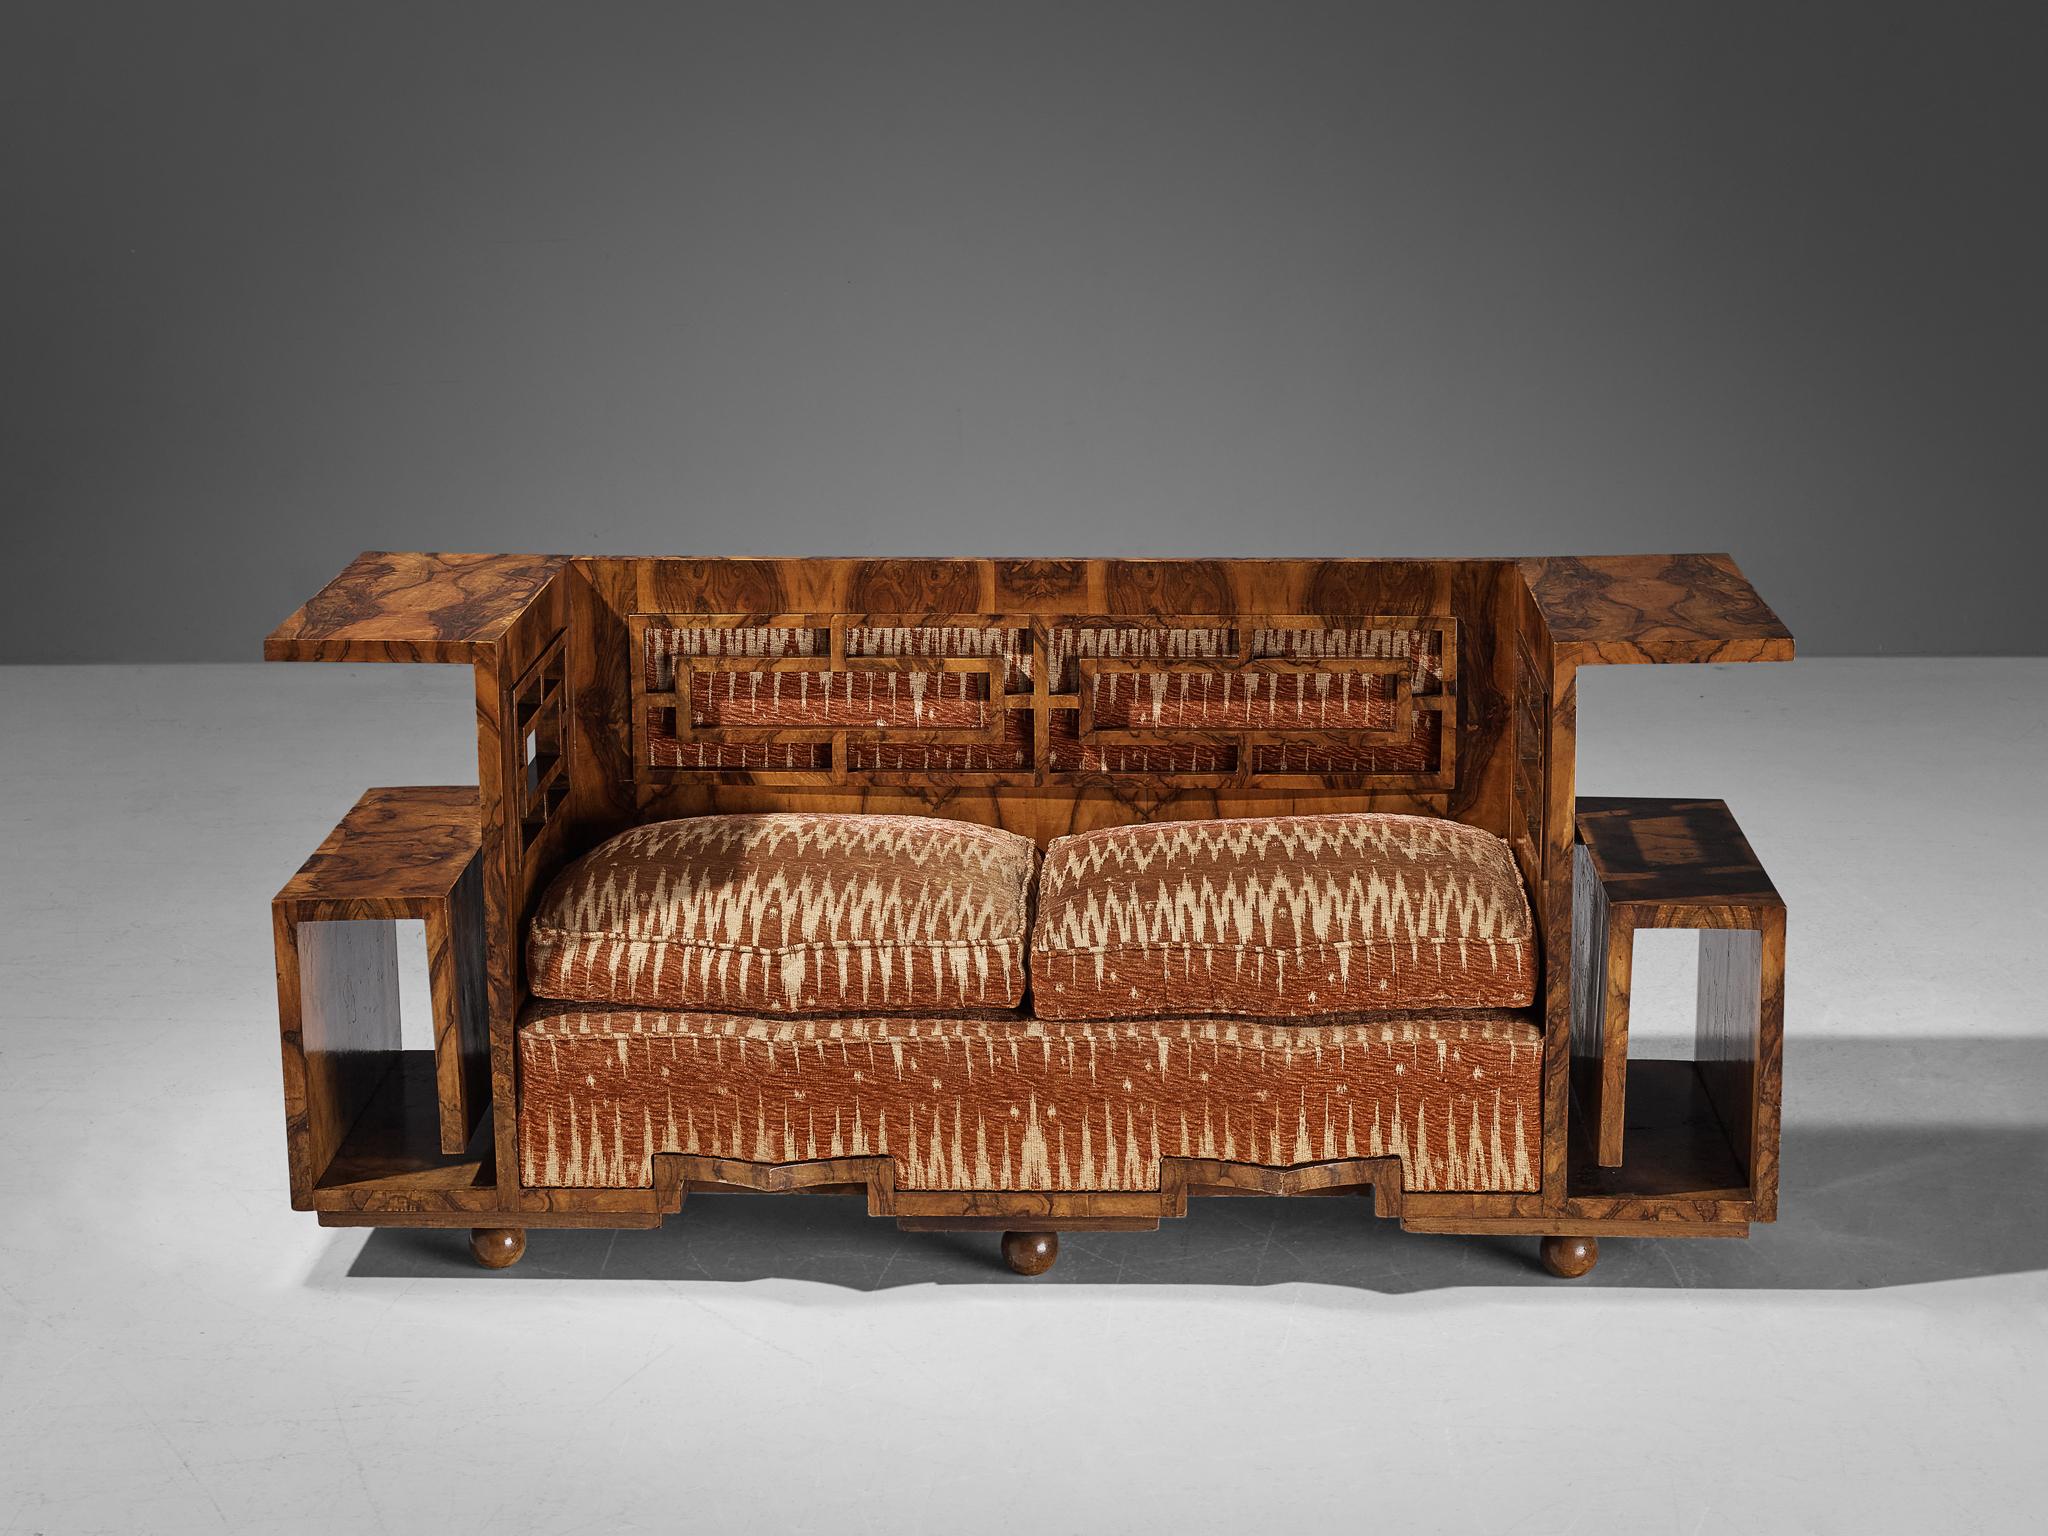 Sofa, walnut burl, velvet, fabric, Italy, 1930s.

This unique sofa is designed according to the Art Deco principles that were in vogue in the 1930s. While the furniture's overall visual appearance was undoubtedly modern, the movement's geometric